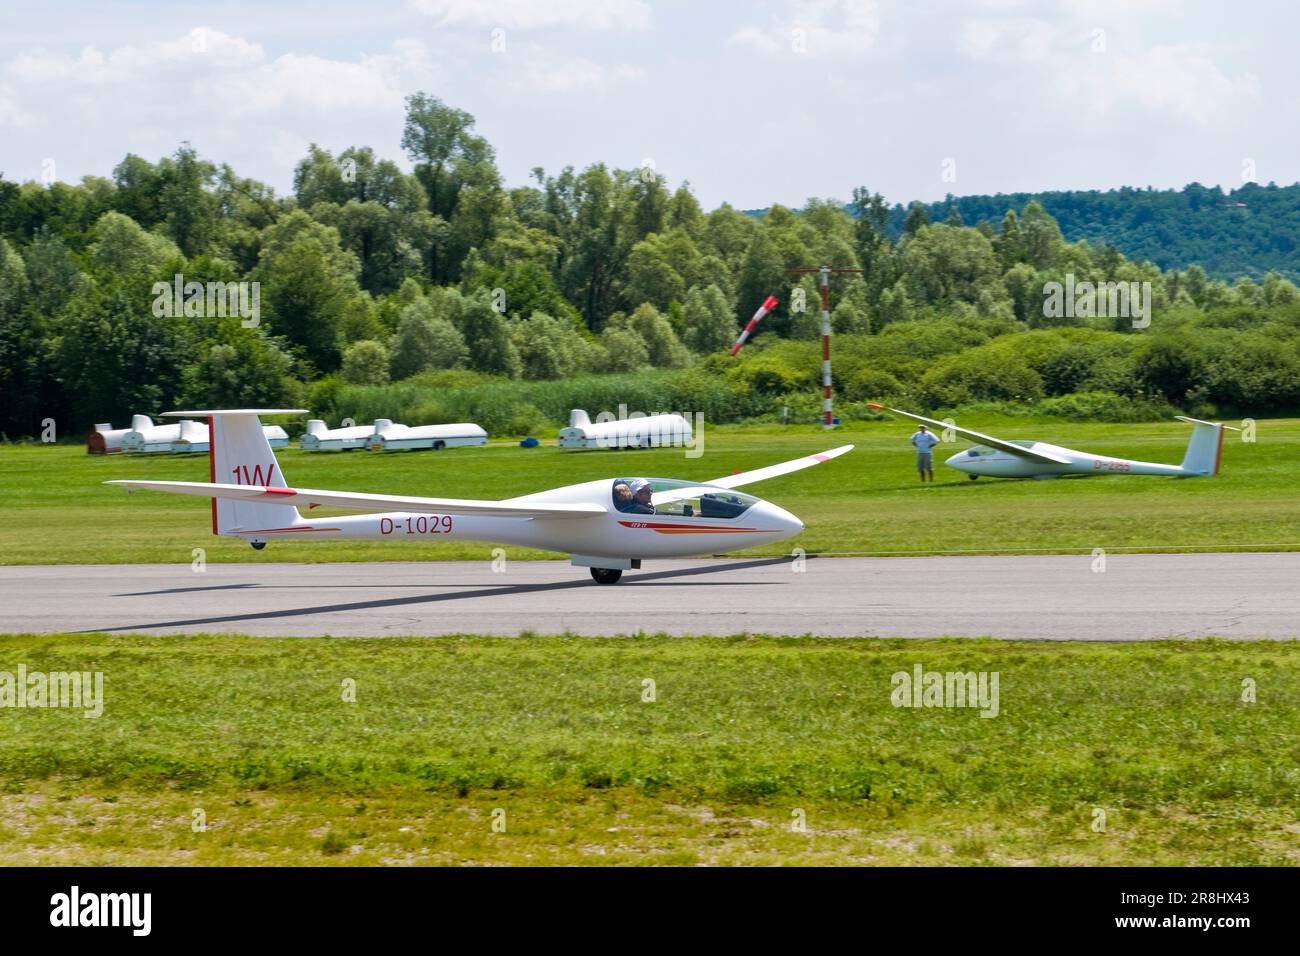 Gliders Airport Adele Orsi. Varese. Lombardy. Italy Stock Photo